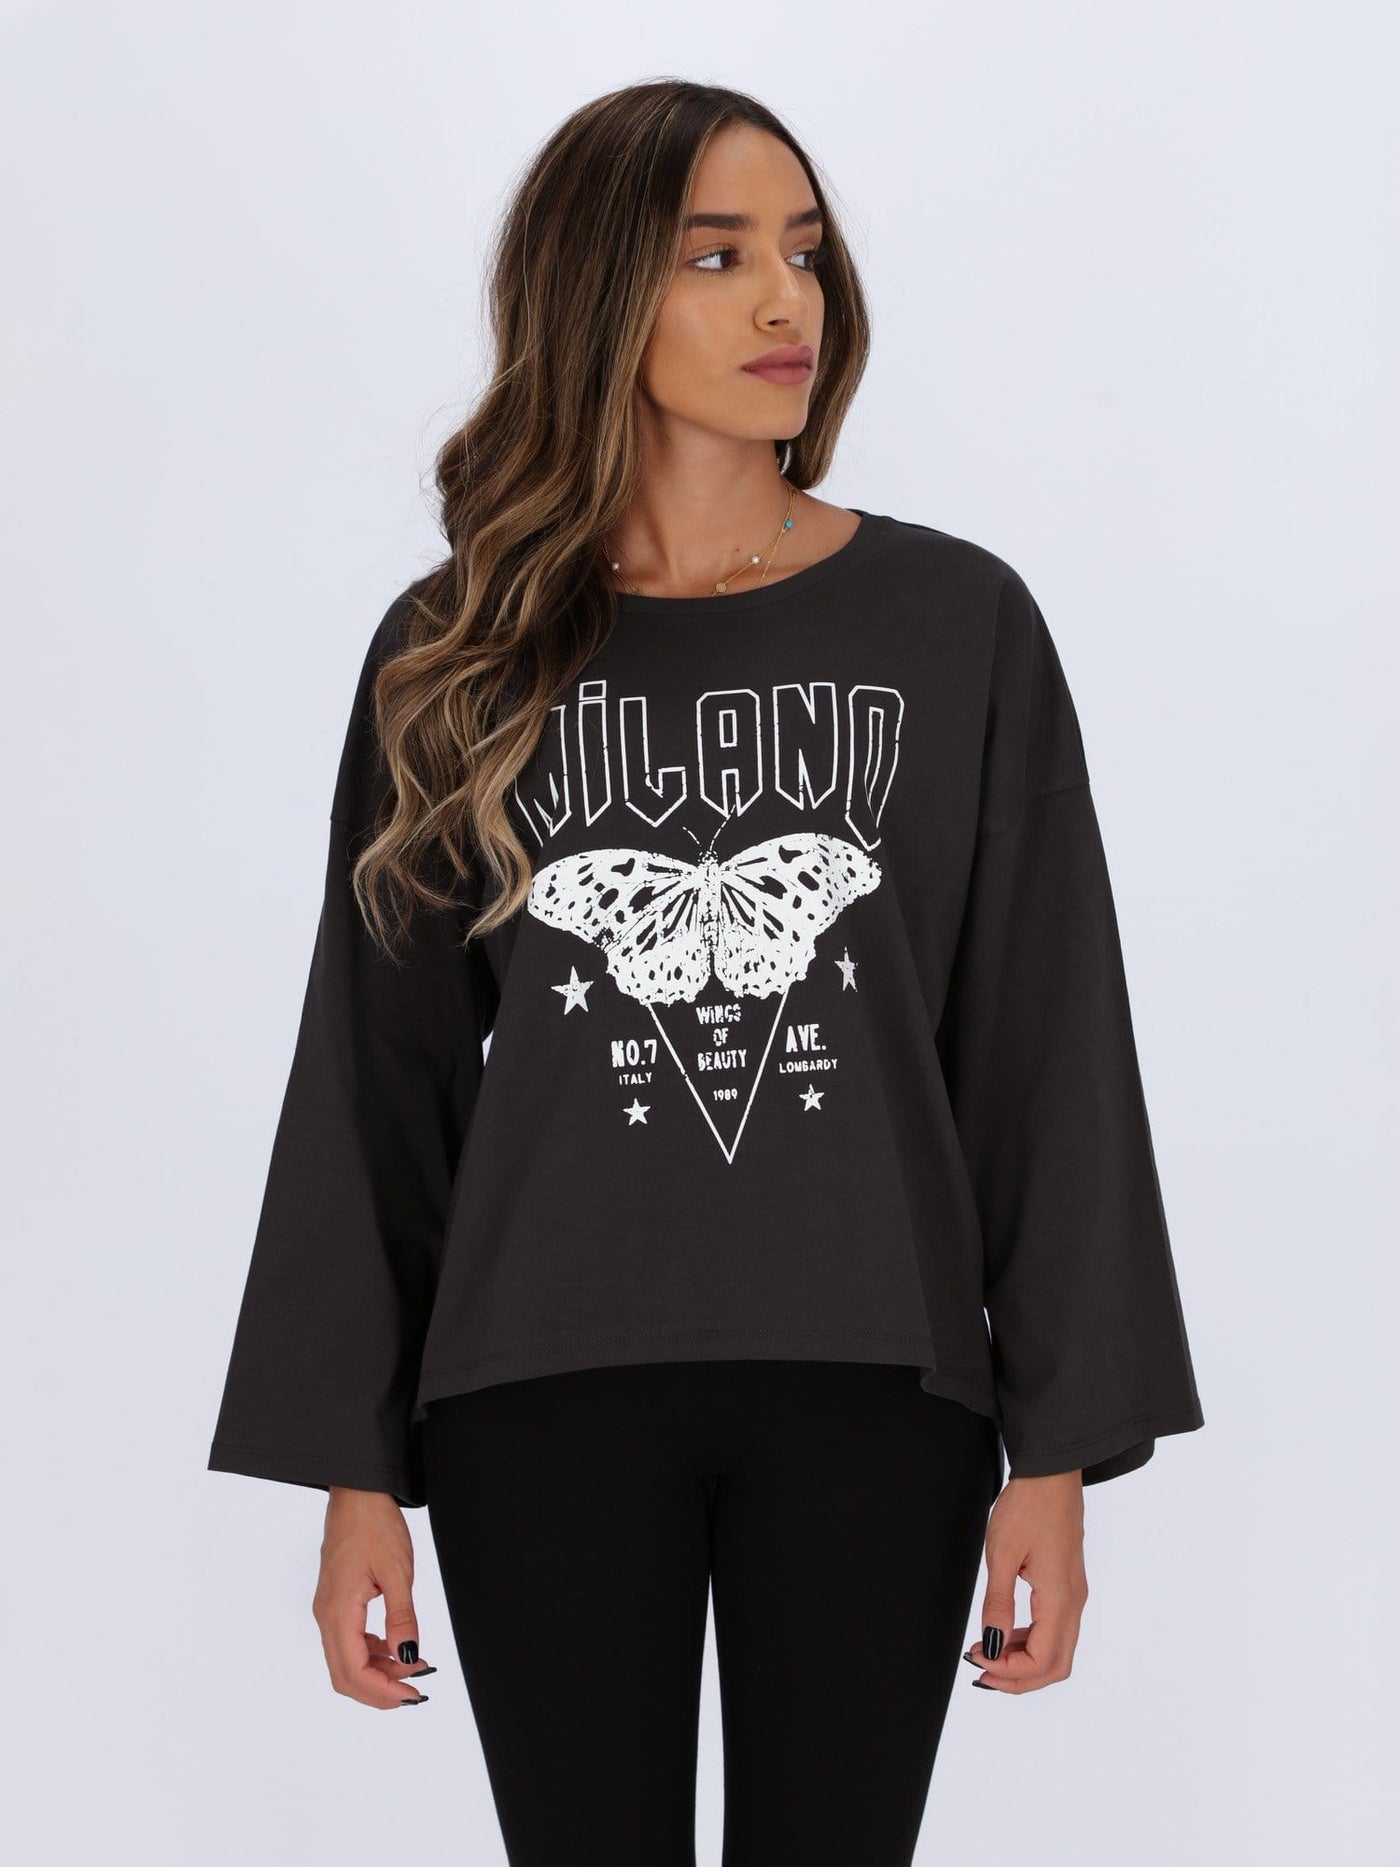 OR Tops & Blouses PIRATE BLACK / M Dropped shoulder Front Printed Top